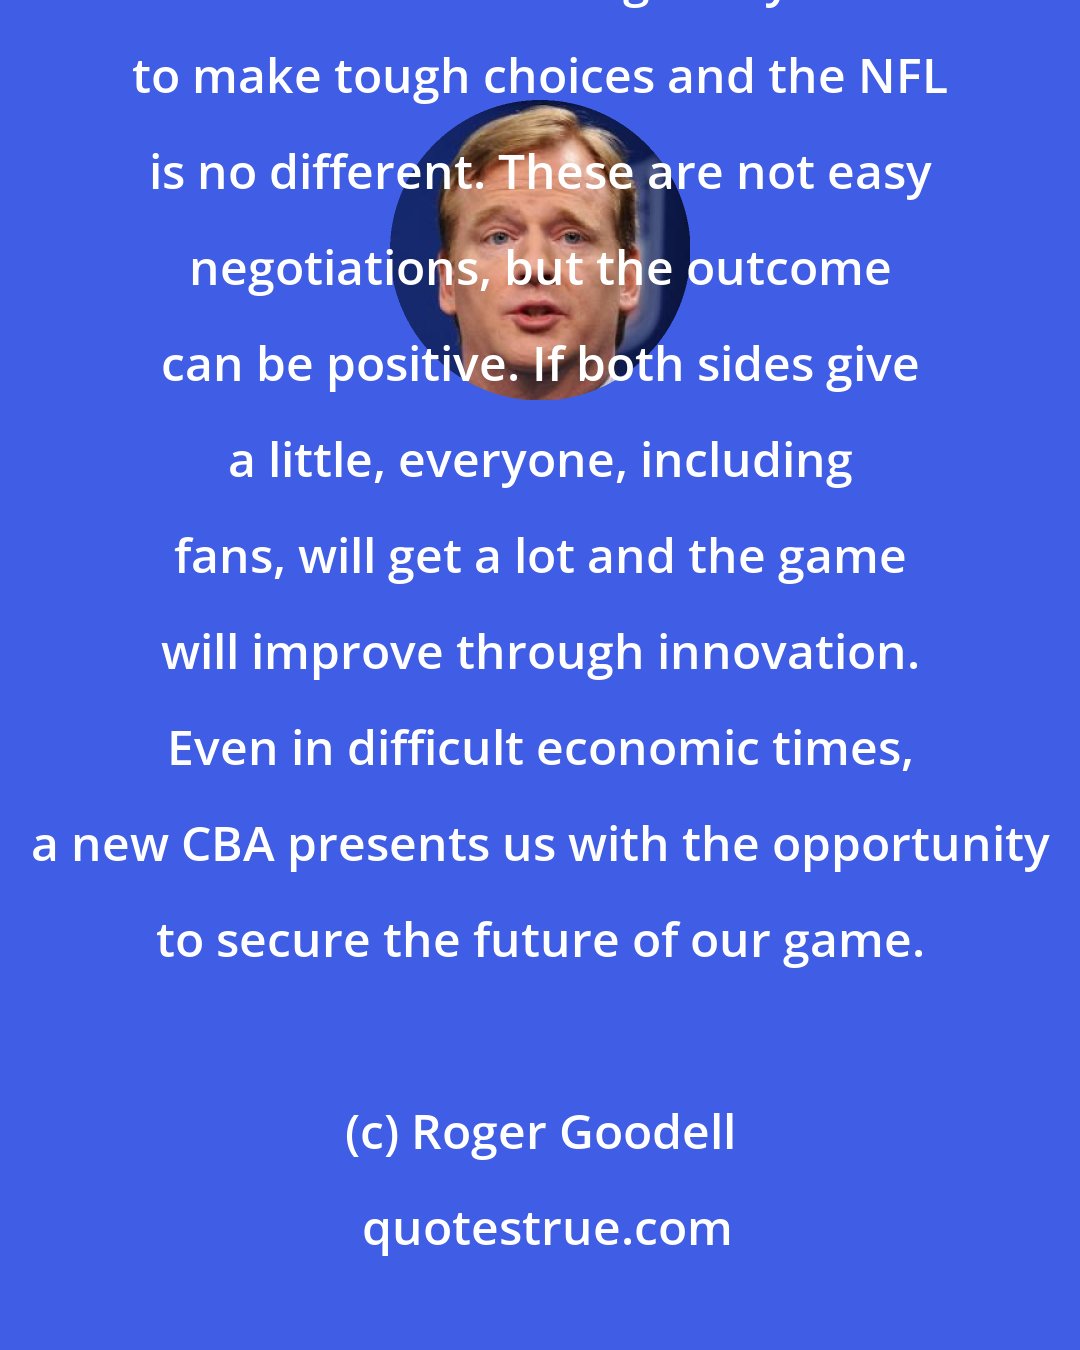 Roger Goodell: Yes, NFL players deserve to be paid well. Unfortunately, economic realities are forcing everyone to make tough choices and the NFL is no different. These are not easy negotiations, but the outcome can be positive. If both sides give a little, everyone, including fans, will get a lot and the game will improve through innovation. Even in difficult economic times, a new CBA presents us with the opportunity to secure the future of our game.